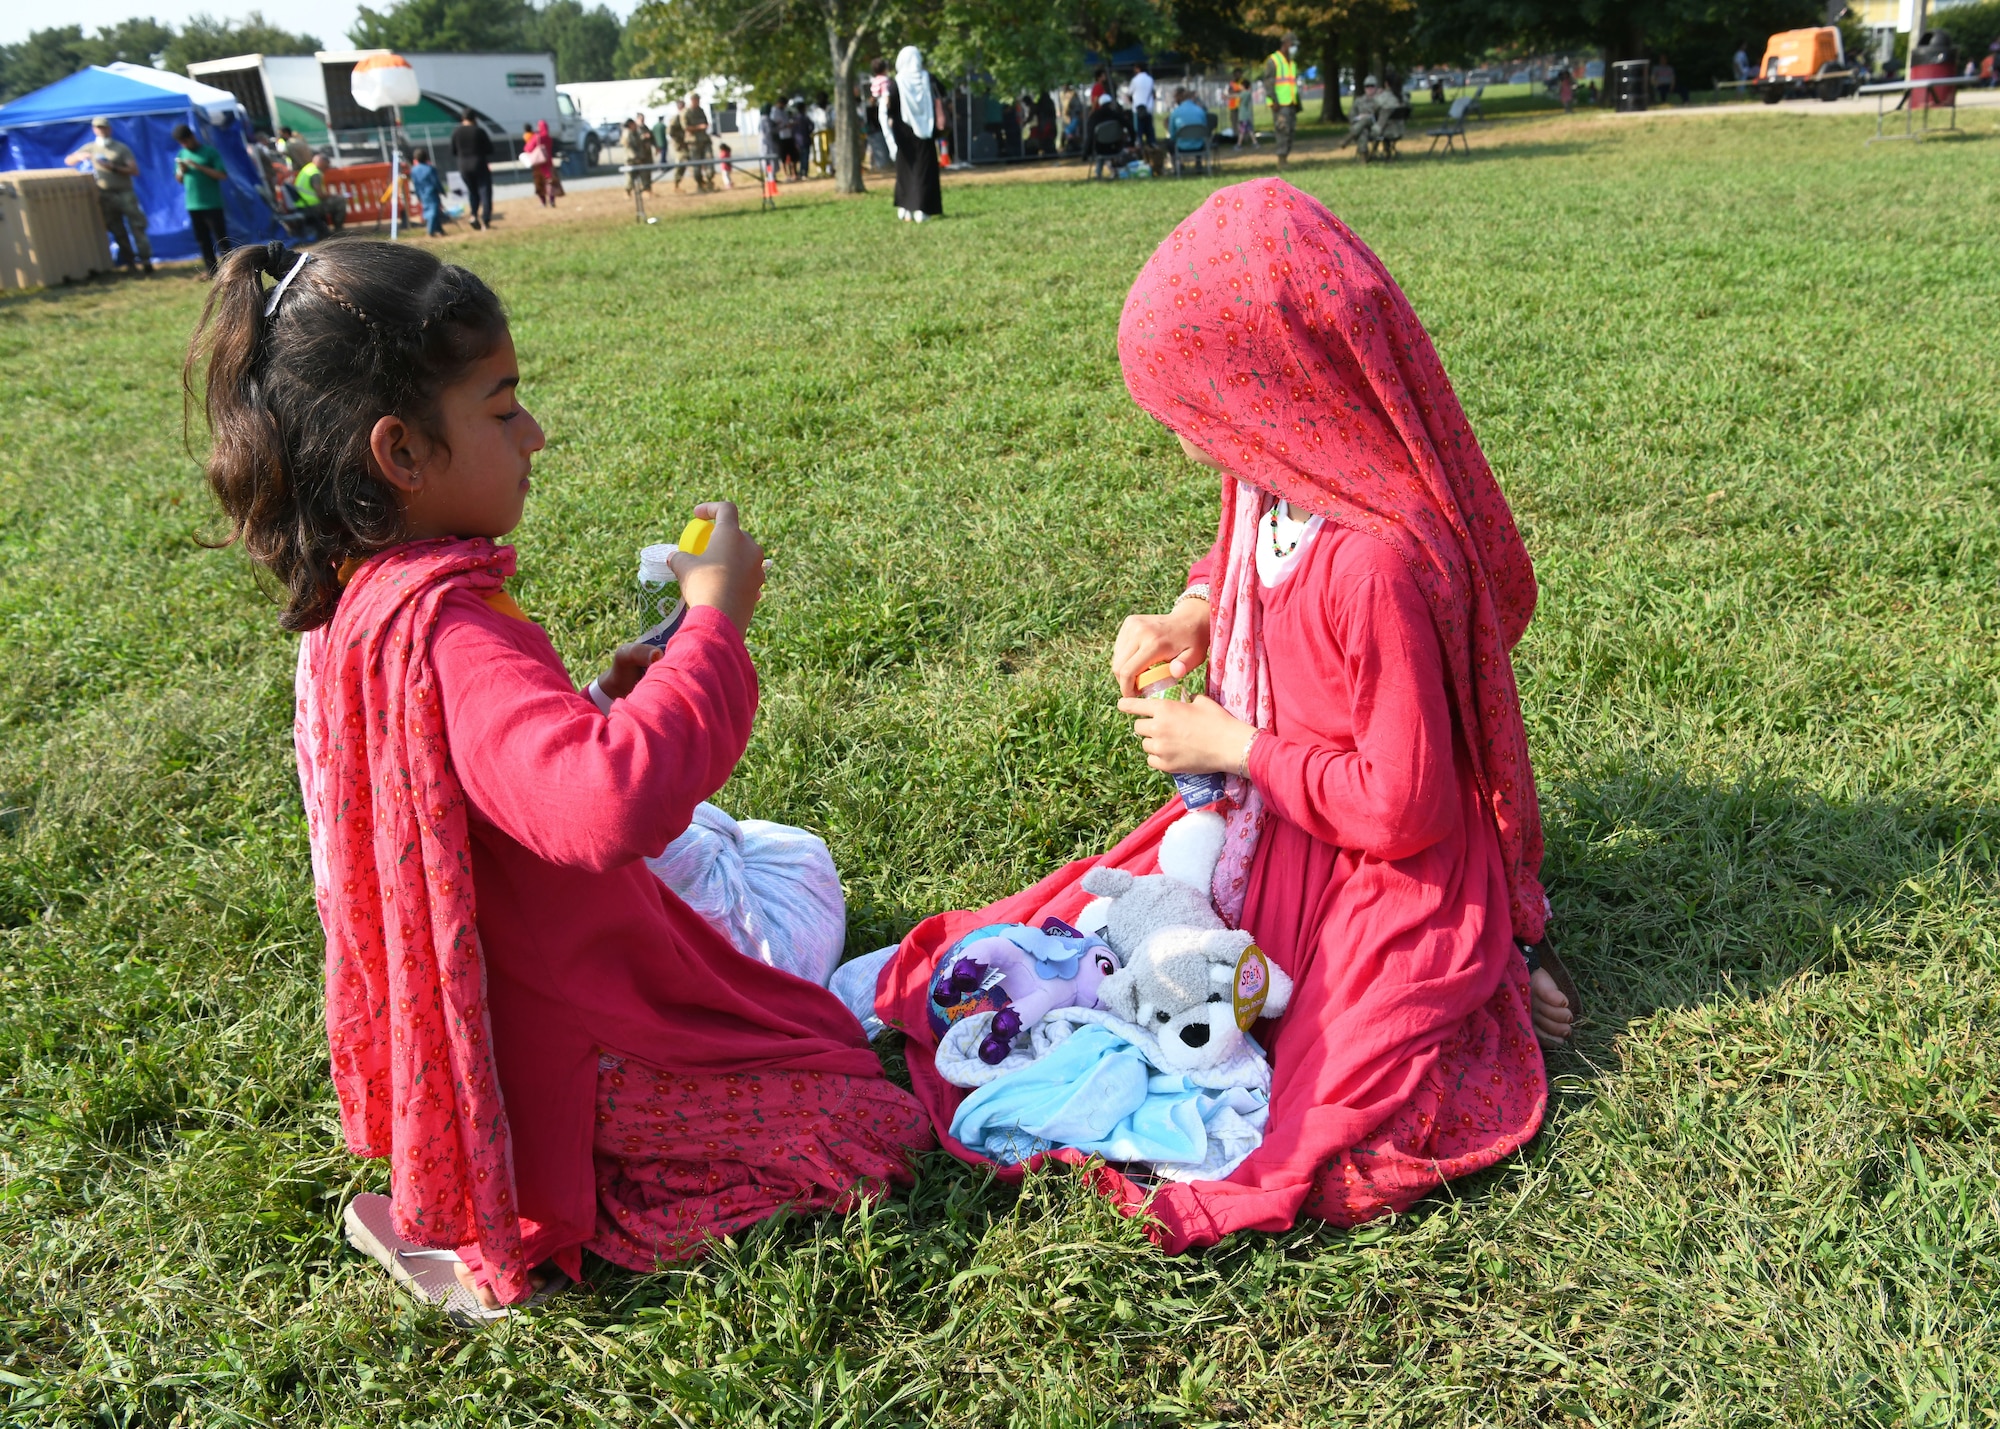 Two Afghan girls enjoy playtime together at Liberty Village, Joint Base McGuire-Dix-Lakehurst, New Jersey, Sept. 13, 2021.  The Department of Defense, through U.S. Northern Command, and in support of the Department of Homeland Security, is providing transportation, temporary housing, medical screening, and general support for at least 50,000 Afghan evacuees at suitable facilities, in permanent or temporary structures, as quickly as possible. This initiative provides Afghan personnel essential support at secure locations outside Afghanistan. (National Guard photo by Master Sgt. John Hughel, Washington Air National Guard)